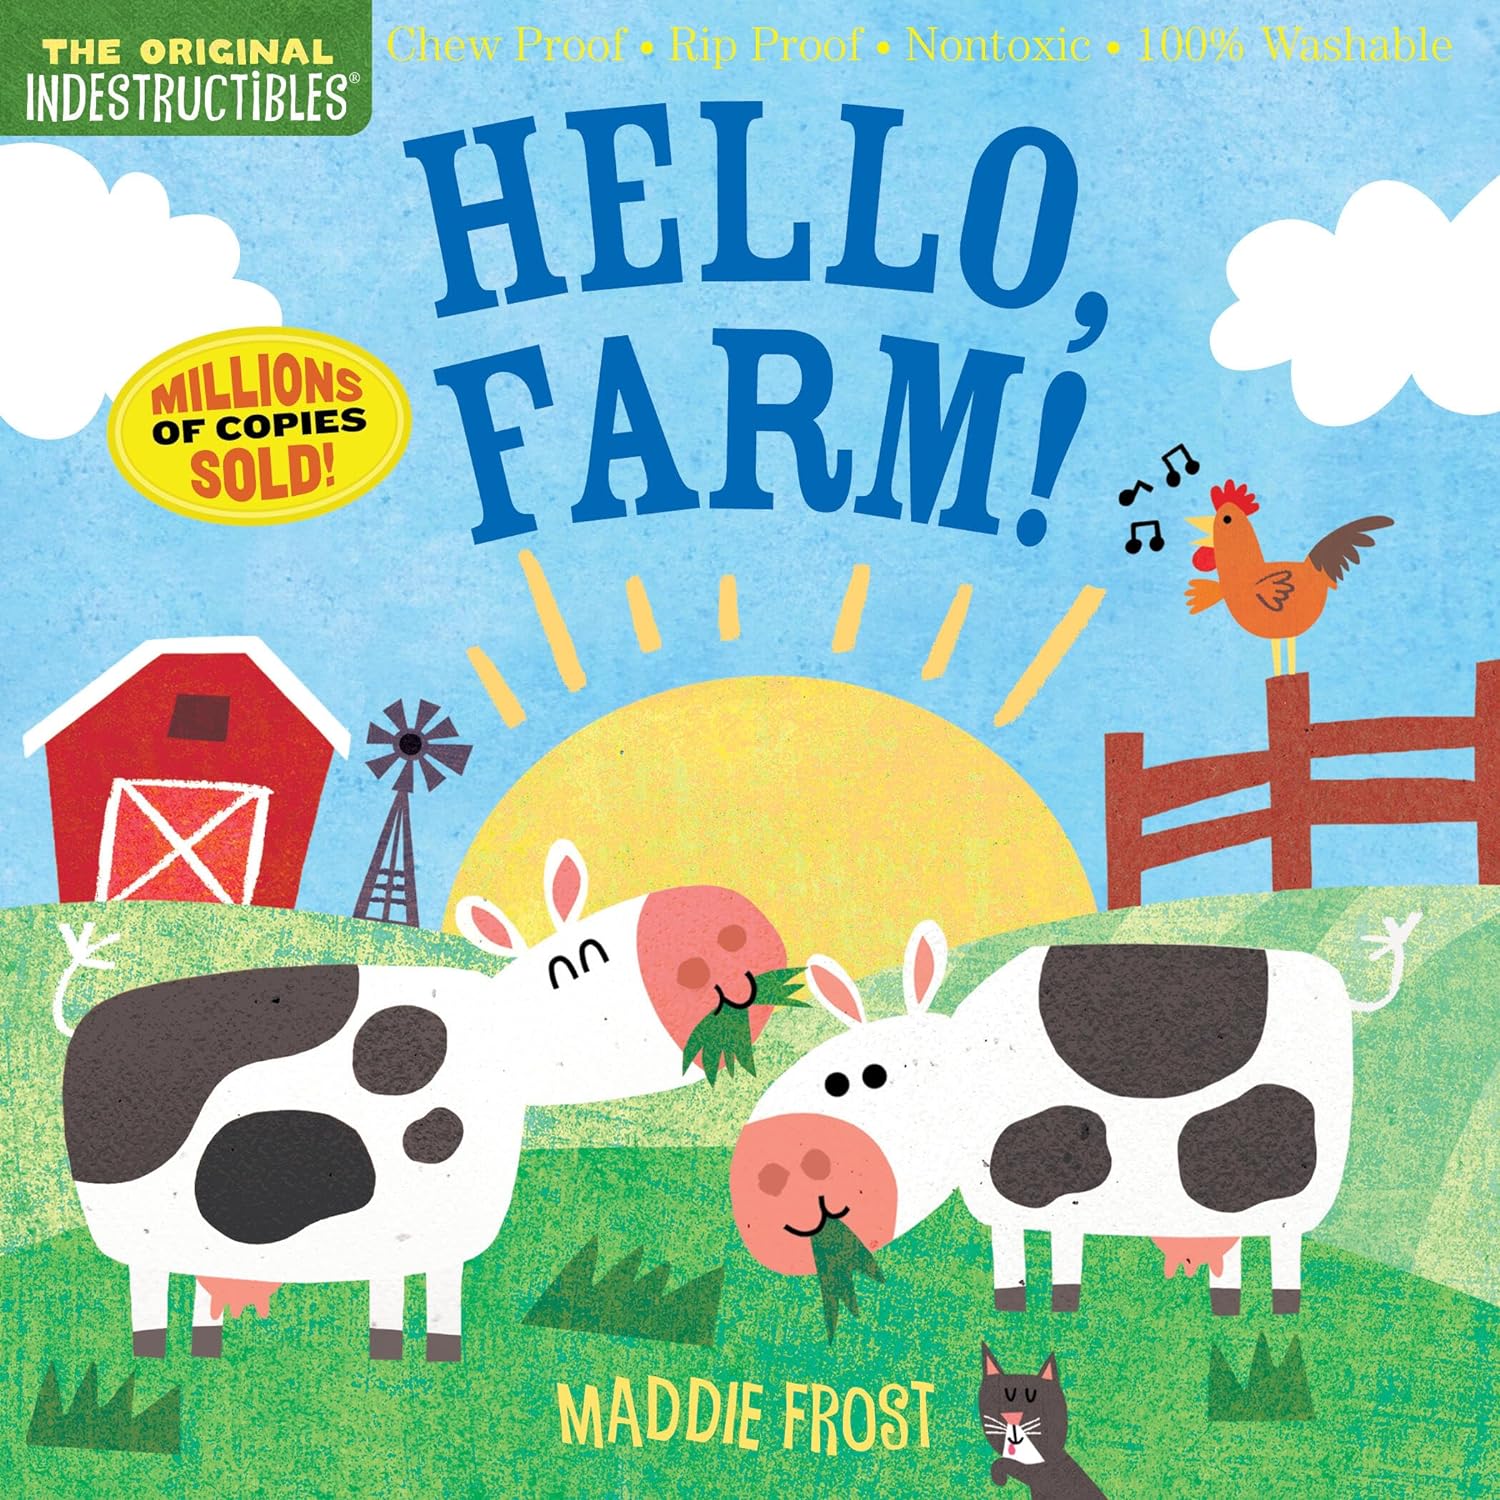 Indestructibles: Hello, Farm!: Chew Proof - Rip Proof - Nontoxic - 100% Washable (Book for Babies, Newborn Books, Safe to Chew) - by Amy Pixton